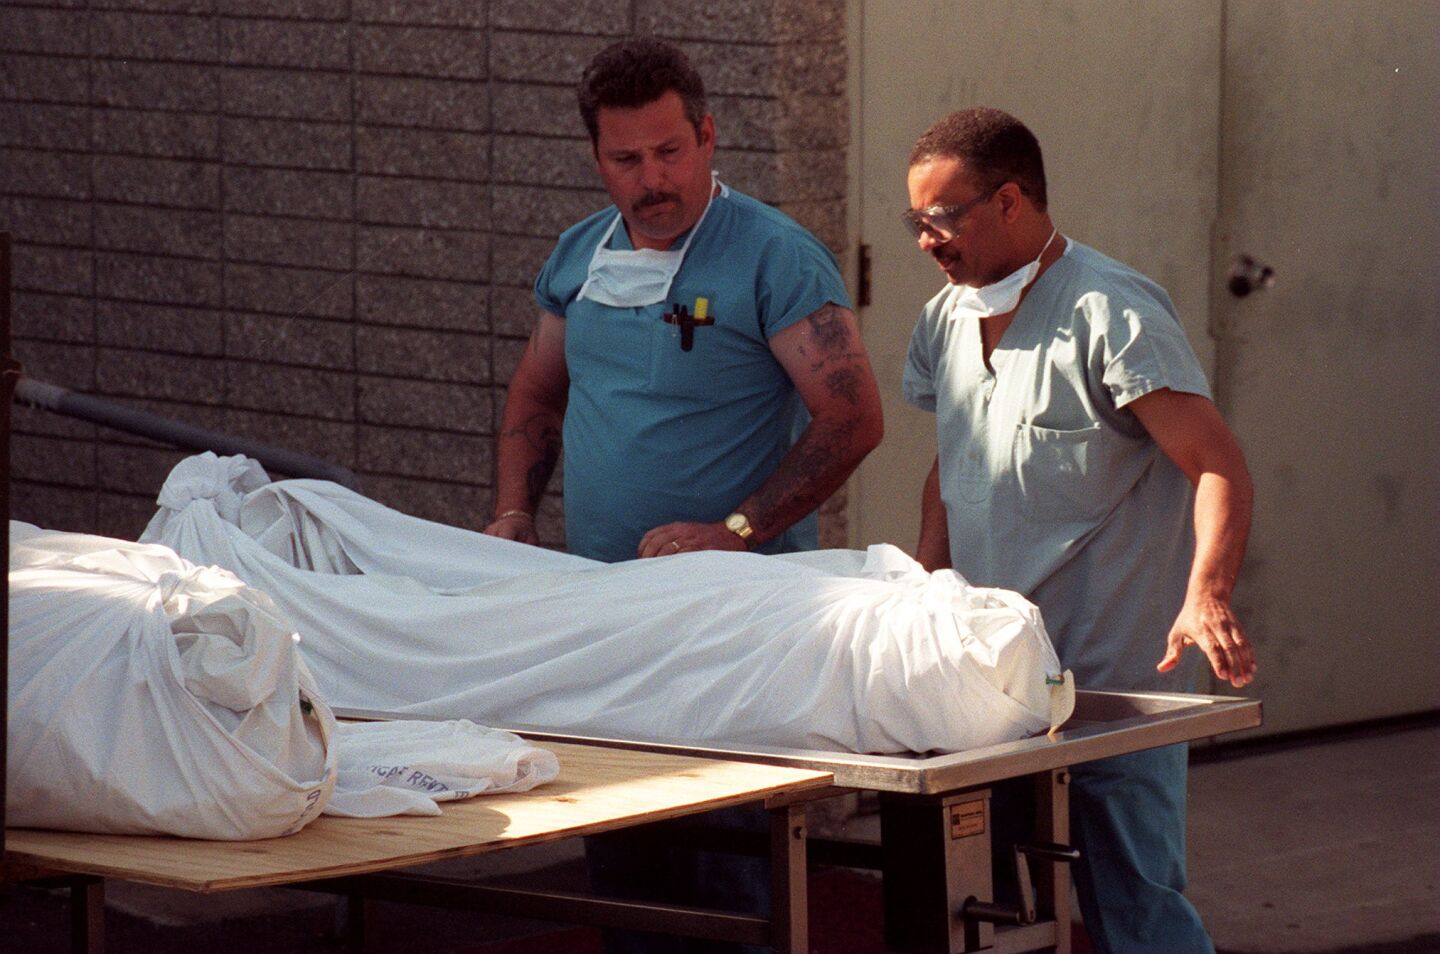 Personnel at the county Medical Examiner's Office in Kearny Mesa prepared to remove two of the 39 bodies discovered after the Heaven's Gate mass suicide in Rancho Santa Fe on March 26, 1997.